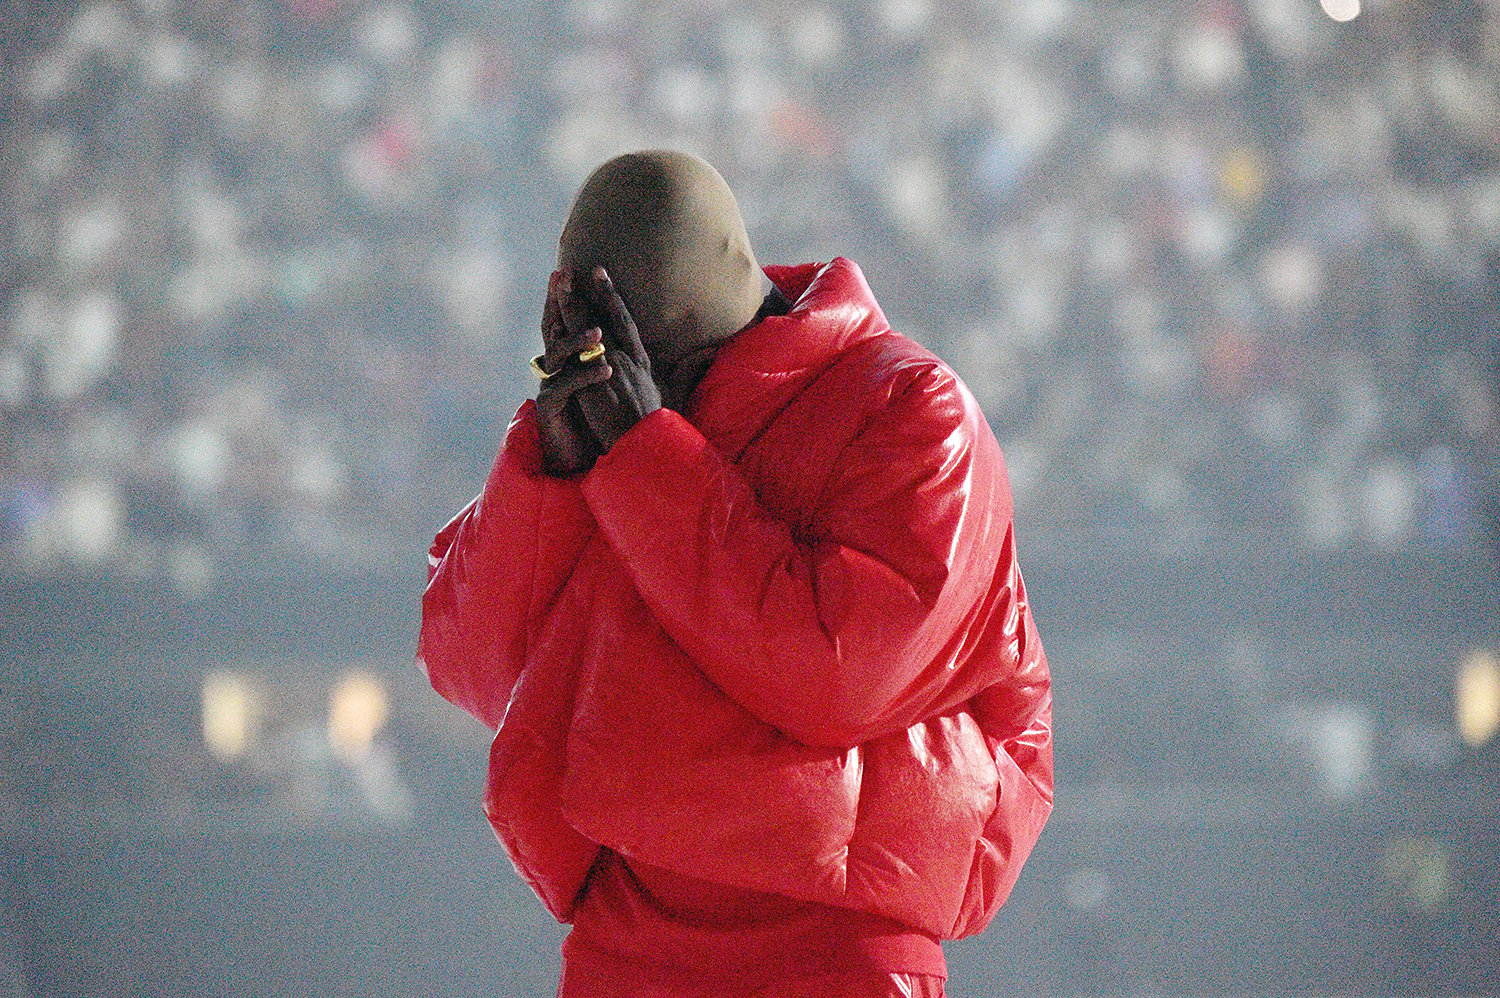 Kanye West rests his head in his hands at the Donda listening event in Atlanta